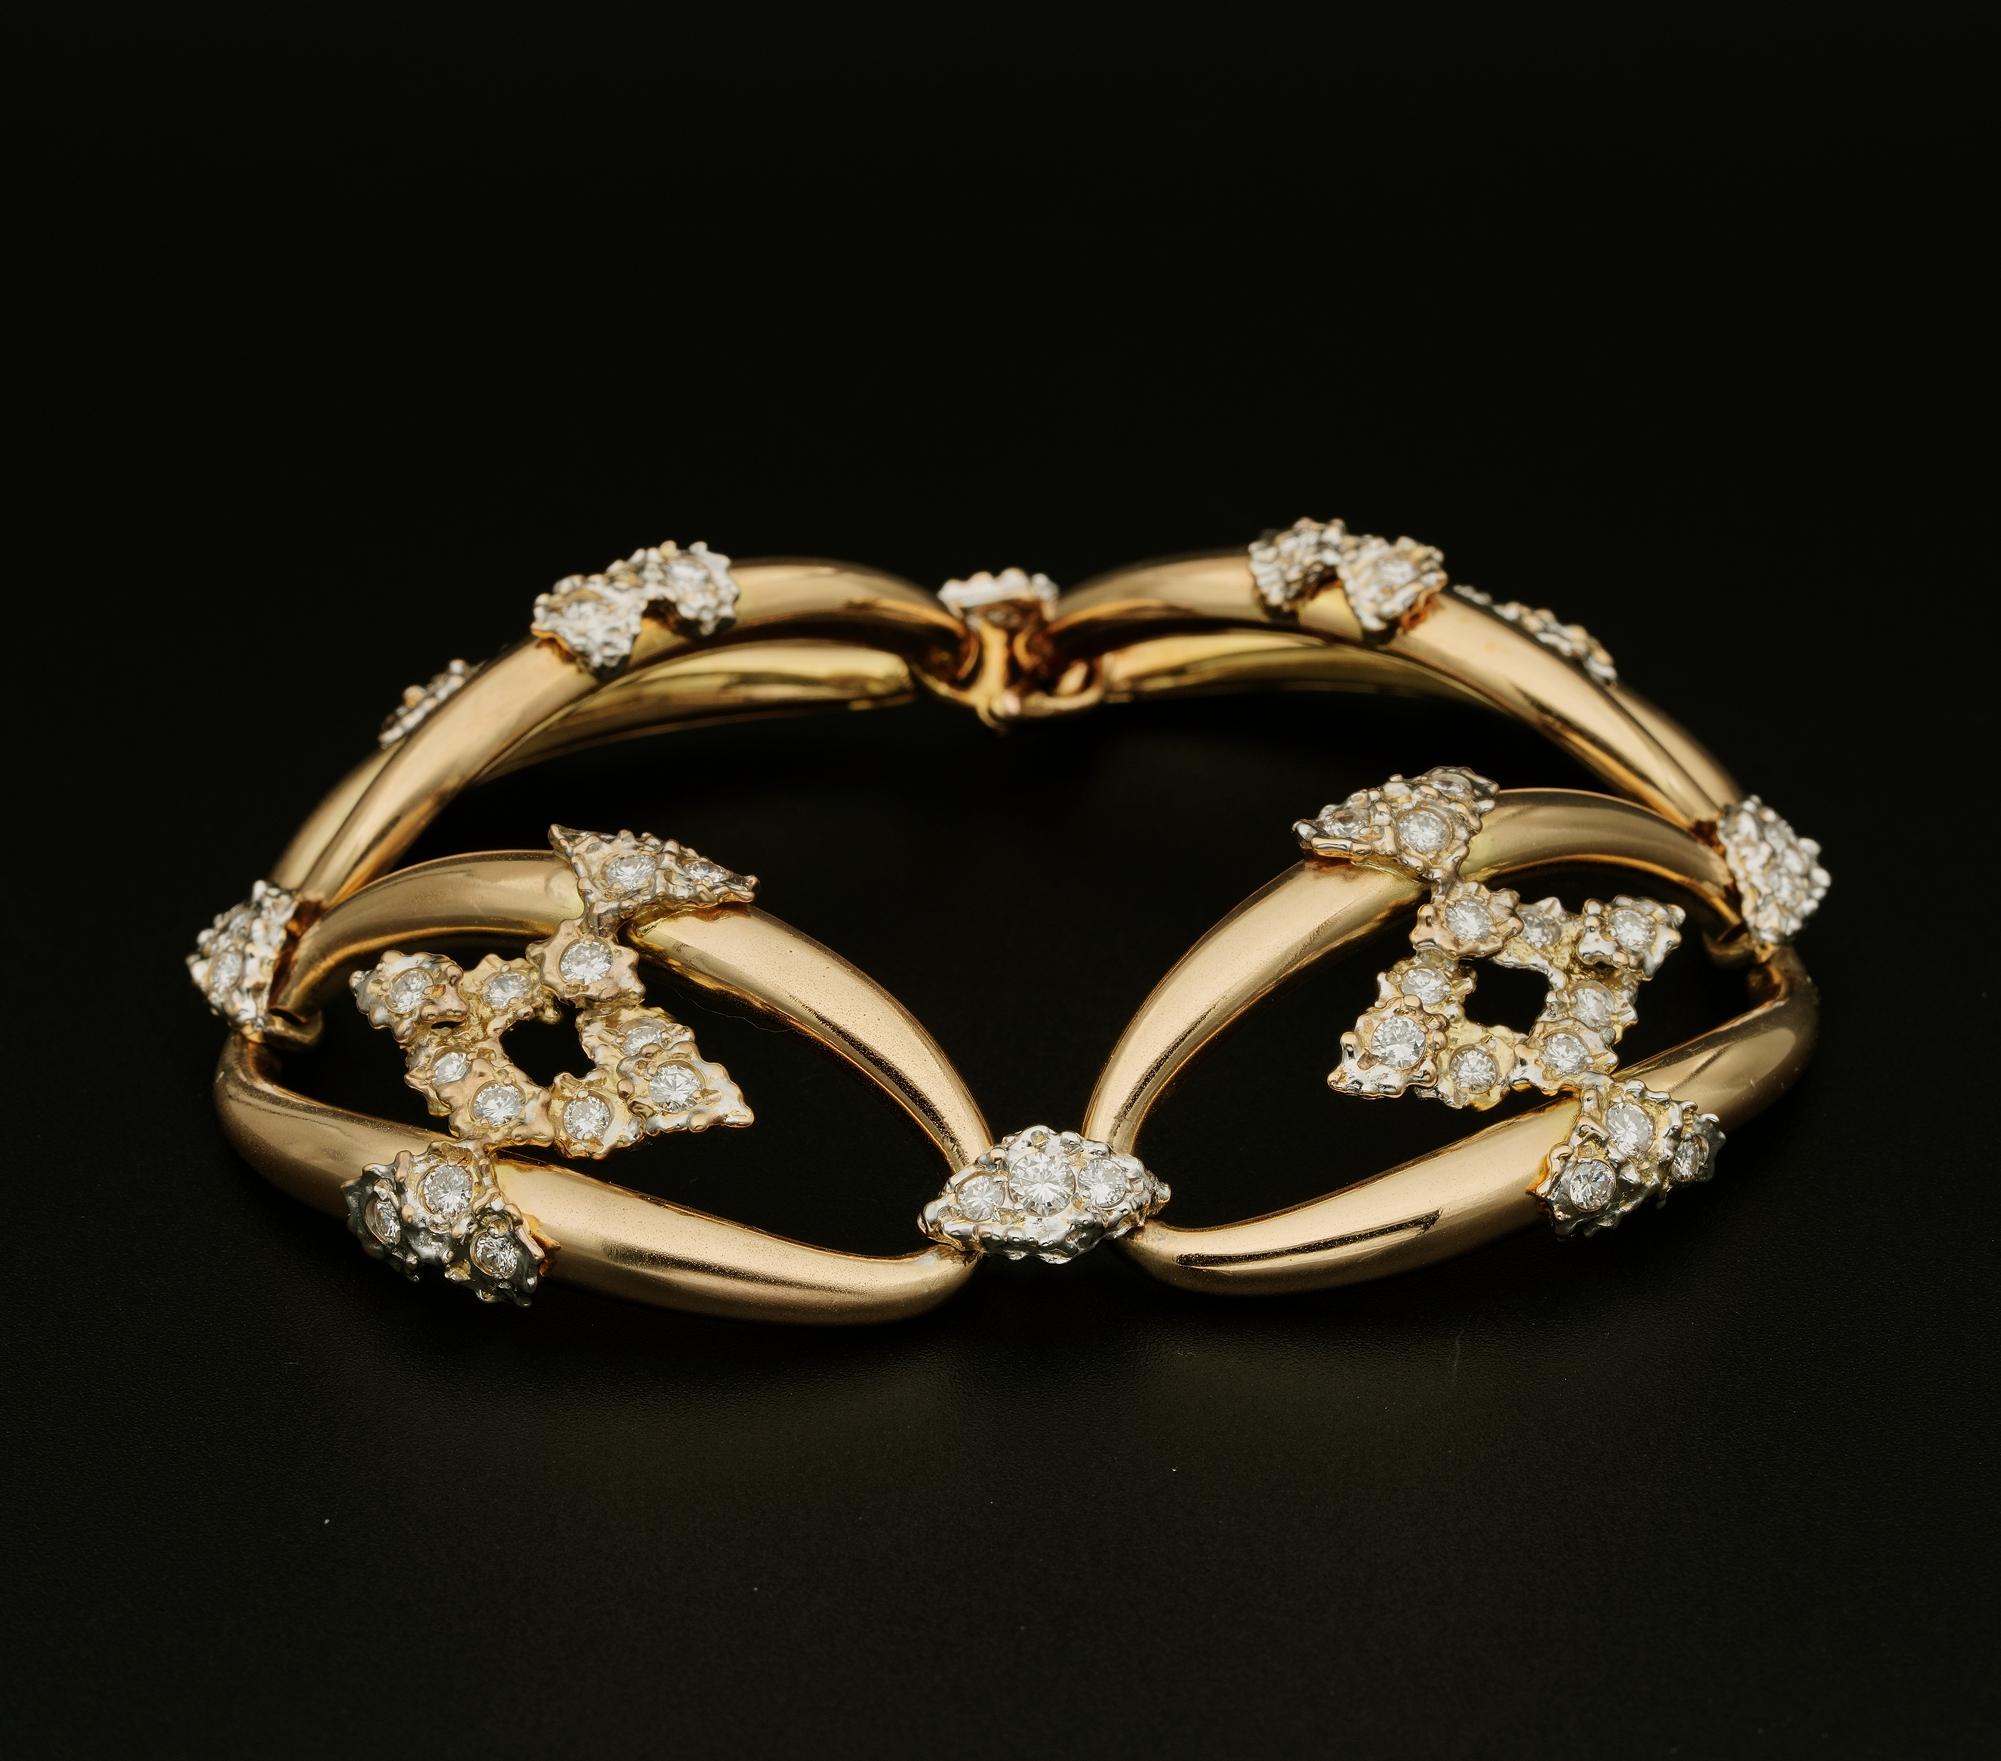 Caught by Beauty
From the late 1940 ca comes this sleek and gleaming bracelet hand crafted as unique piece for an ageless style
Fantastic appearance catching the attention for design and and Diamond sparkle
Comprising omega links of yellow gold with